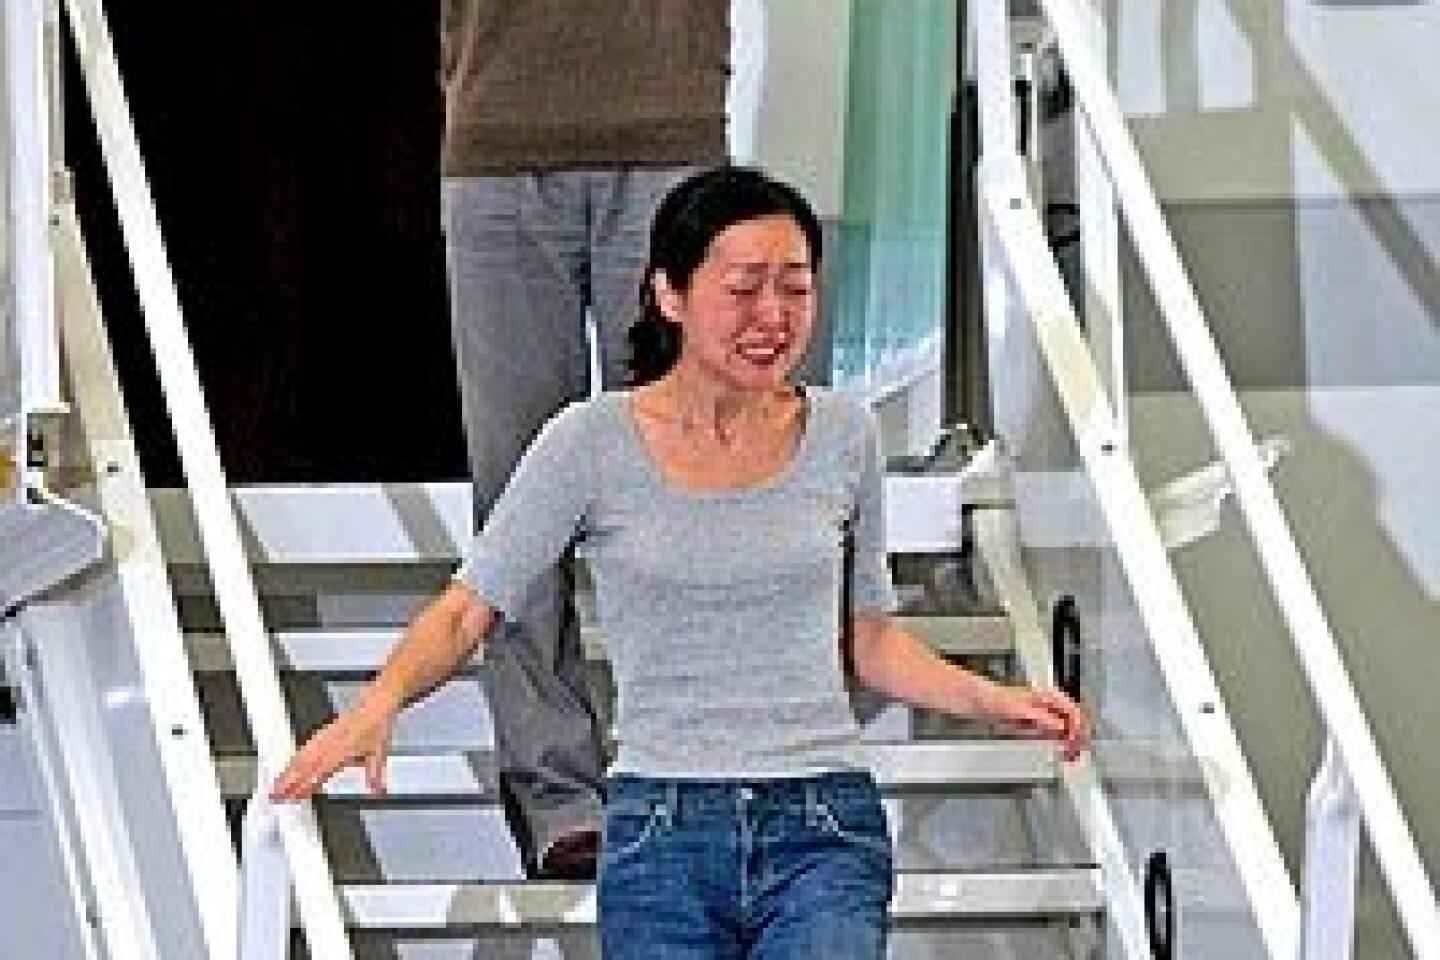 Free Laura Ling and Euna Lee (US Journalists Detained in North